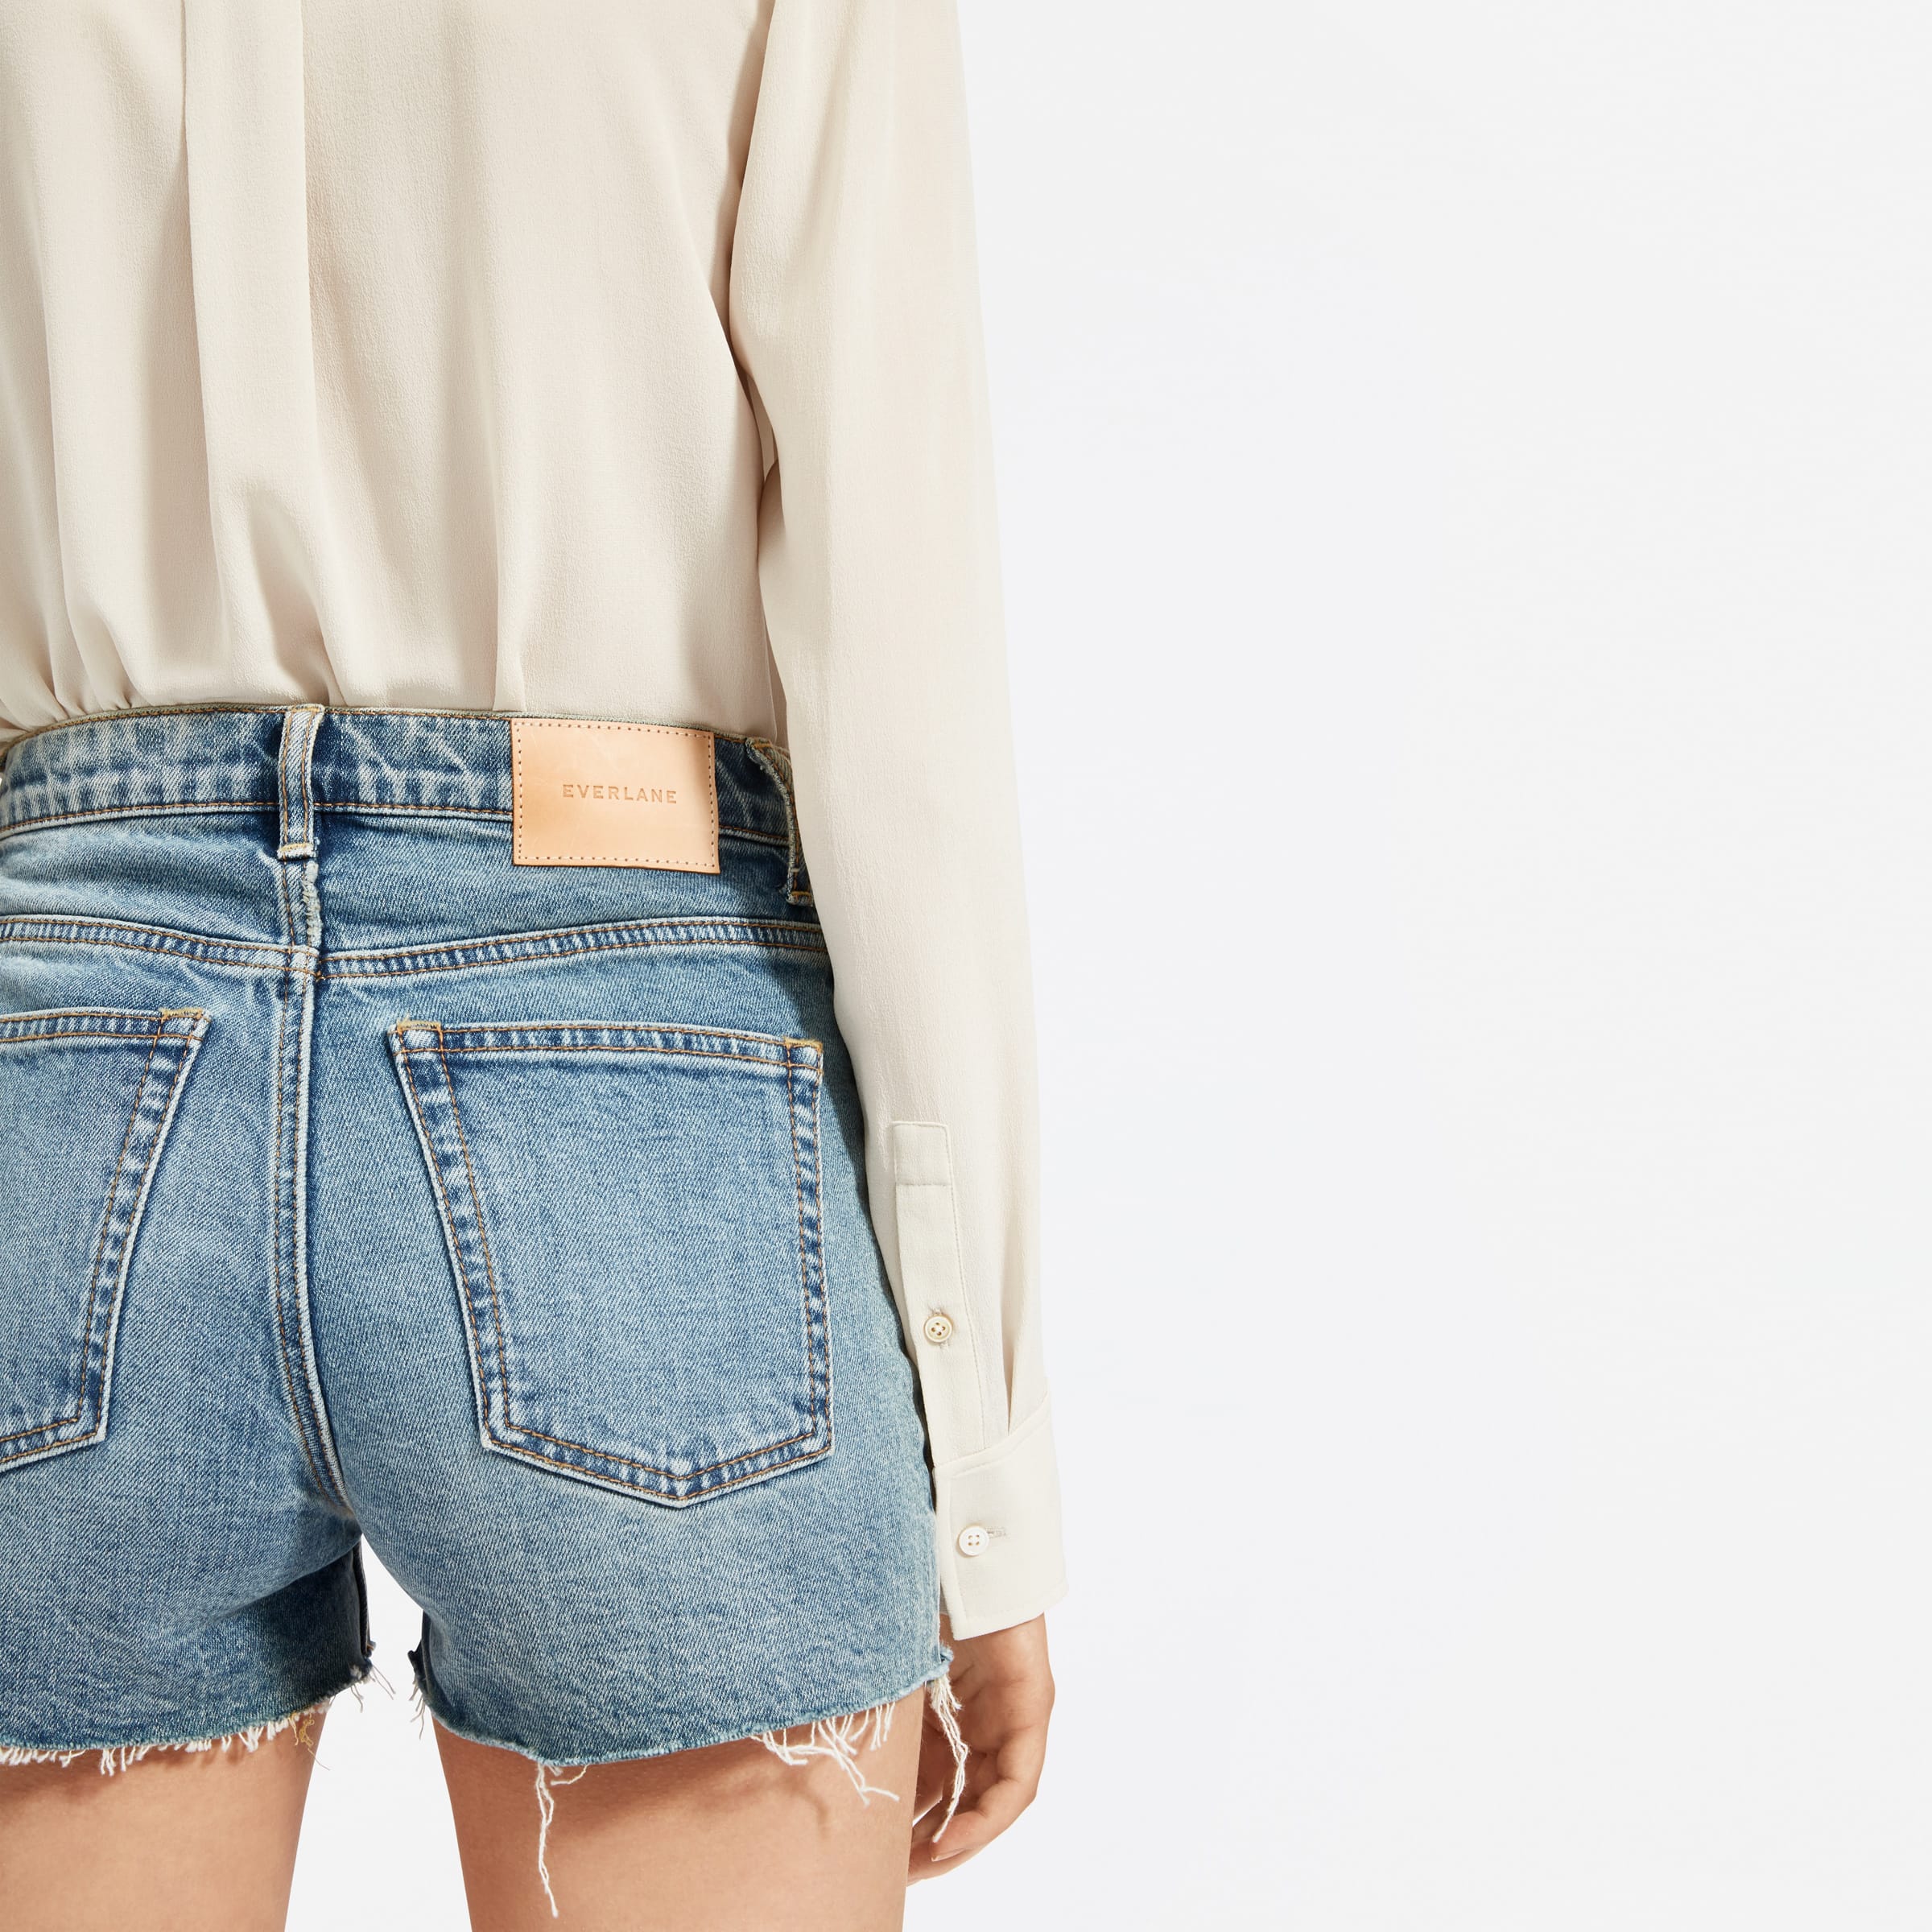 cheeky jeans shorts